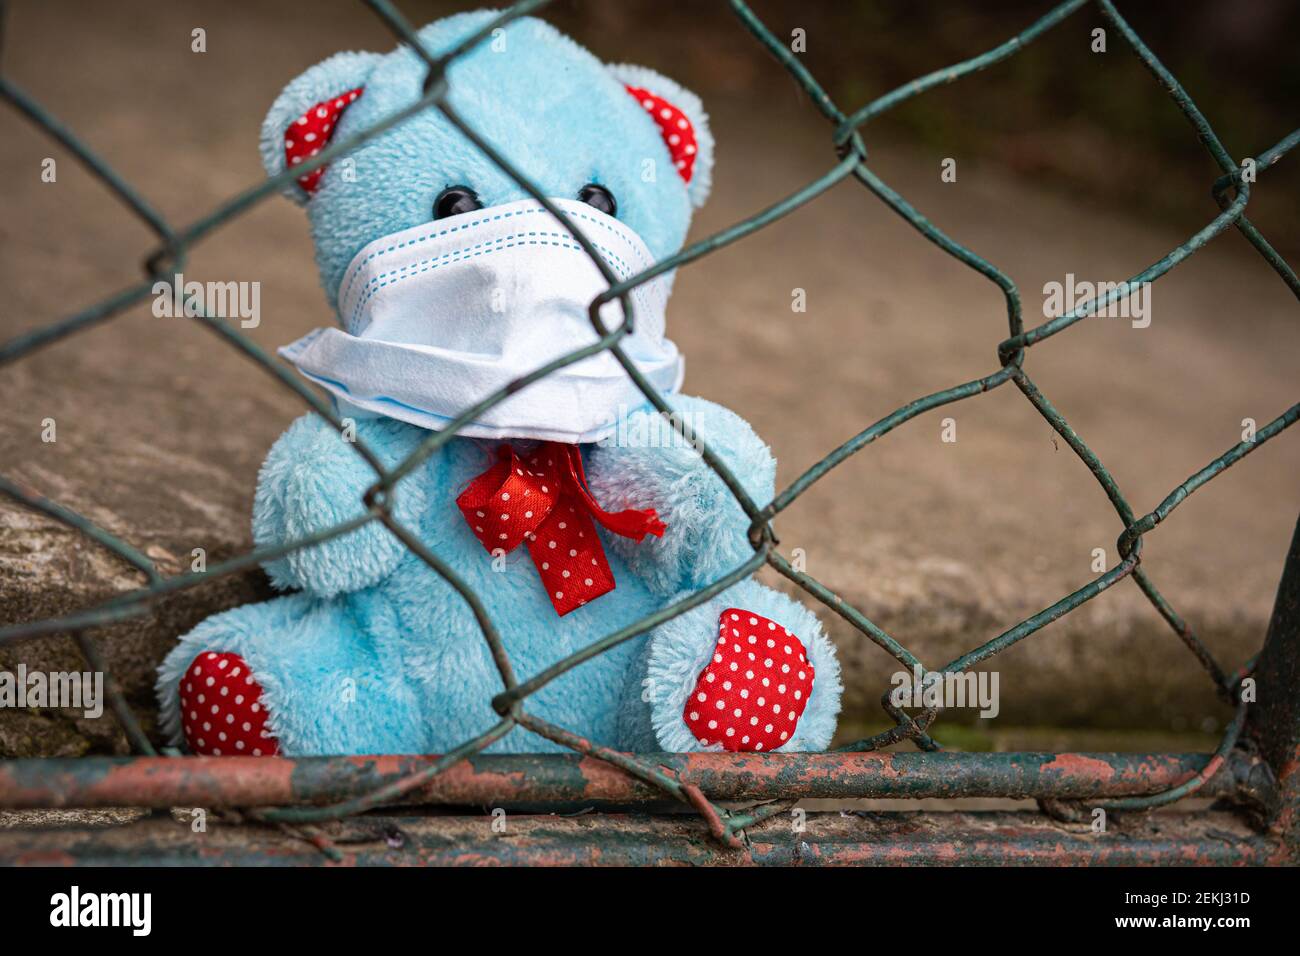 Free Images : cold, teddy bear, textile, illustration, plush, drug, stuffed  animal, bless you, tablets, cartoon, ill, recovery, disease, knuffig,  stethoscope, stuffed toy, get well soon, fever thermometer 5184x3456 - -  1206846 